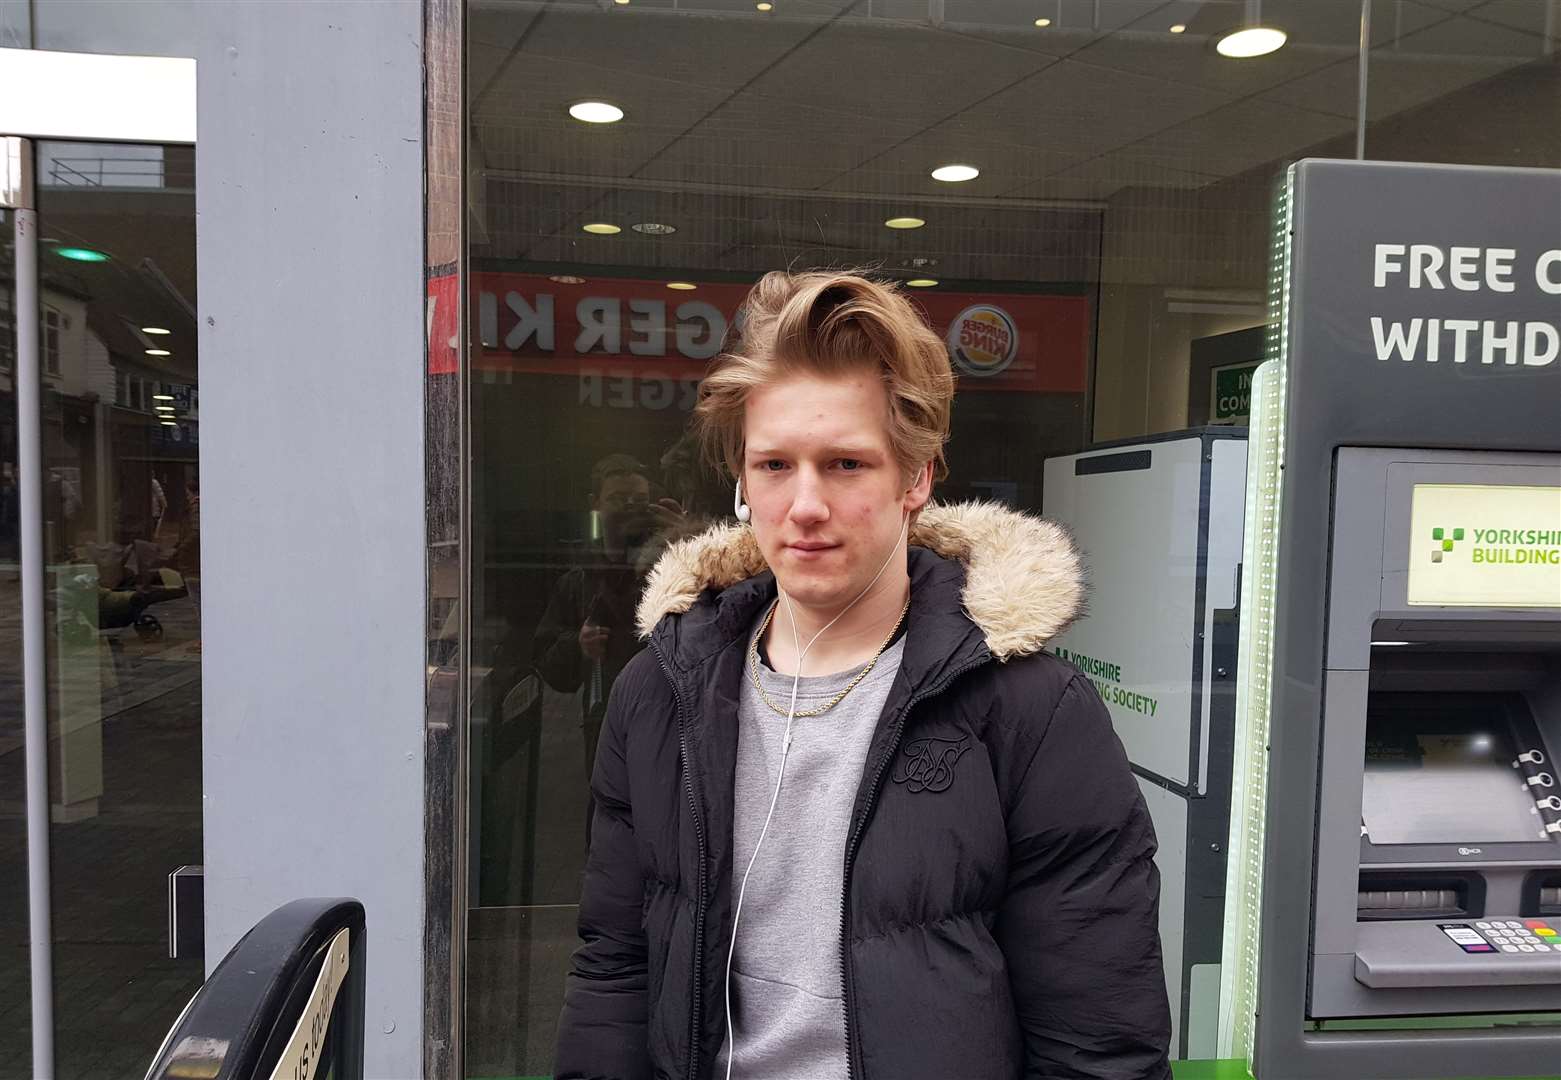 Seb Crocker was one of those waiting for a haircut in Maidstone on Monday